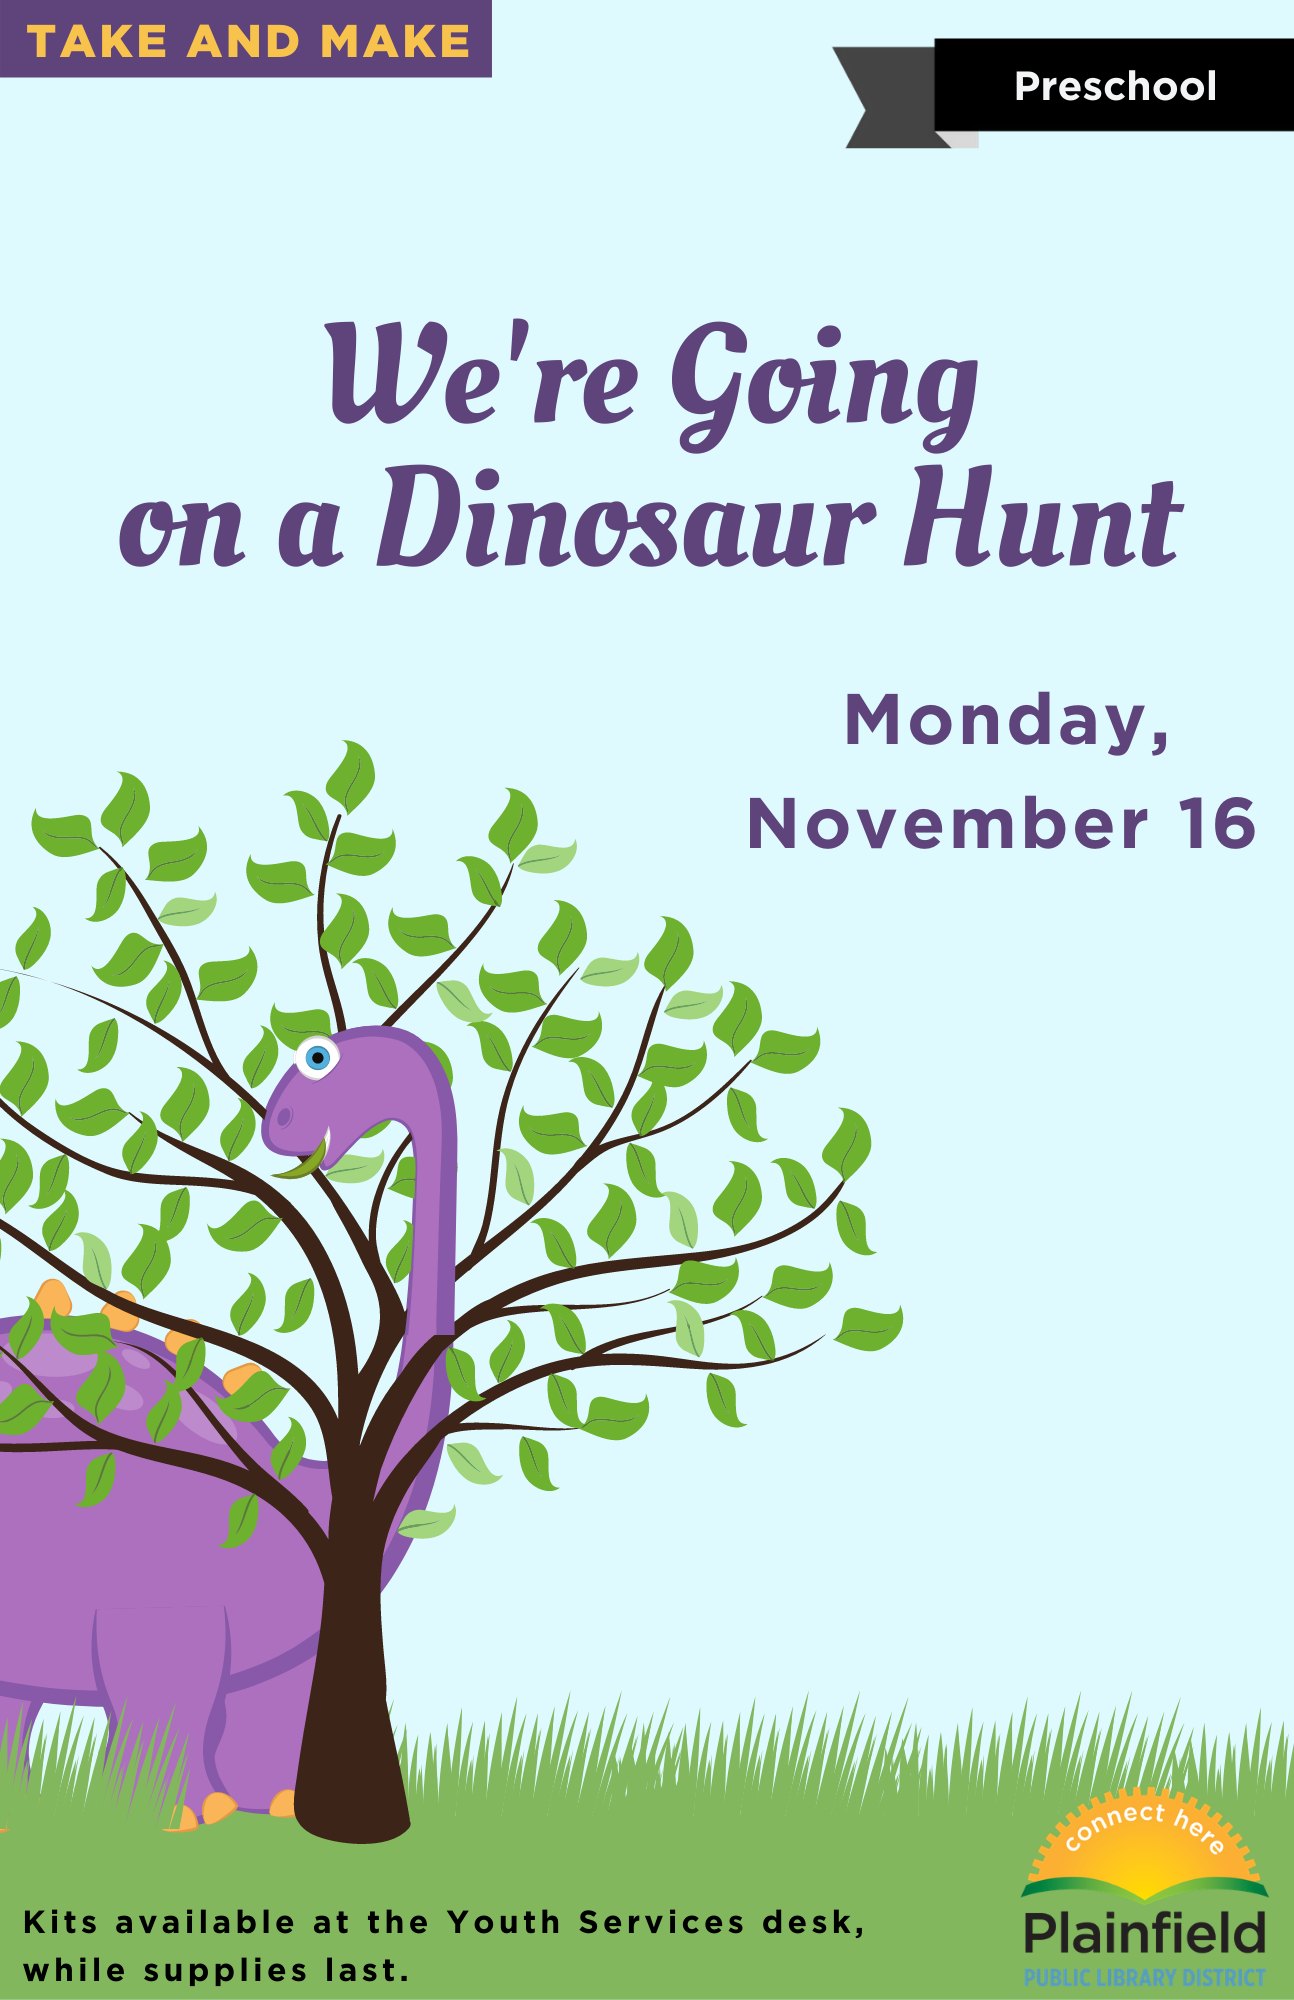 We're going on a dinosaur hunt